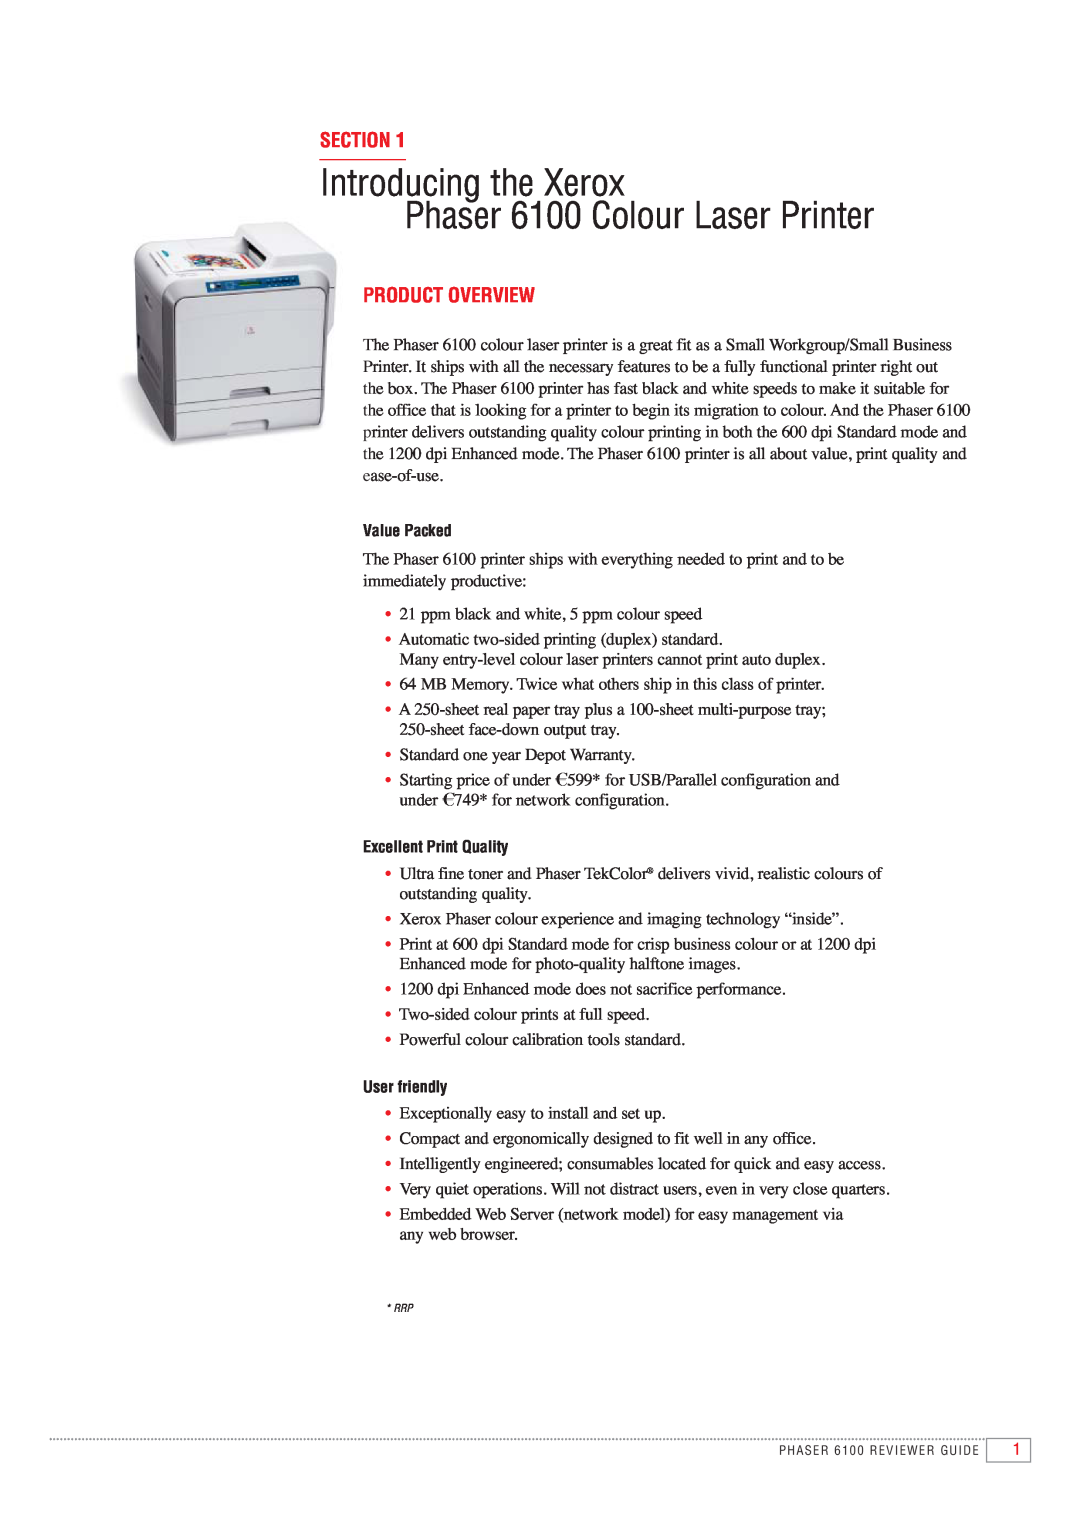 Xerox manual Introducing the Xerox, Phaser 6100 Colour Laser Printer, Section, Product Overview 